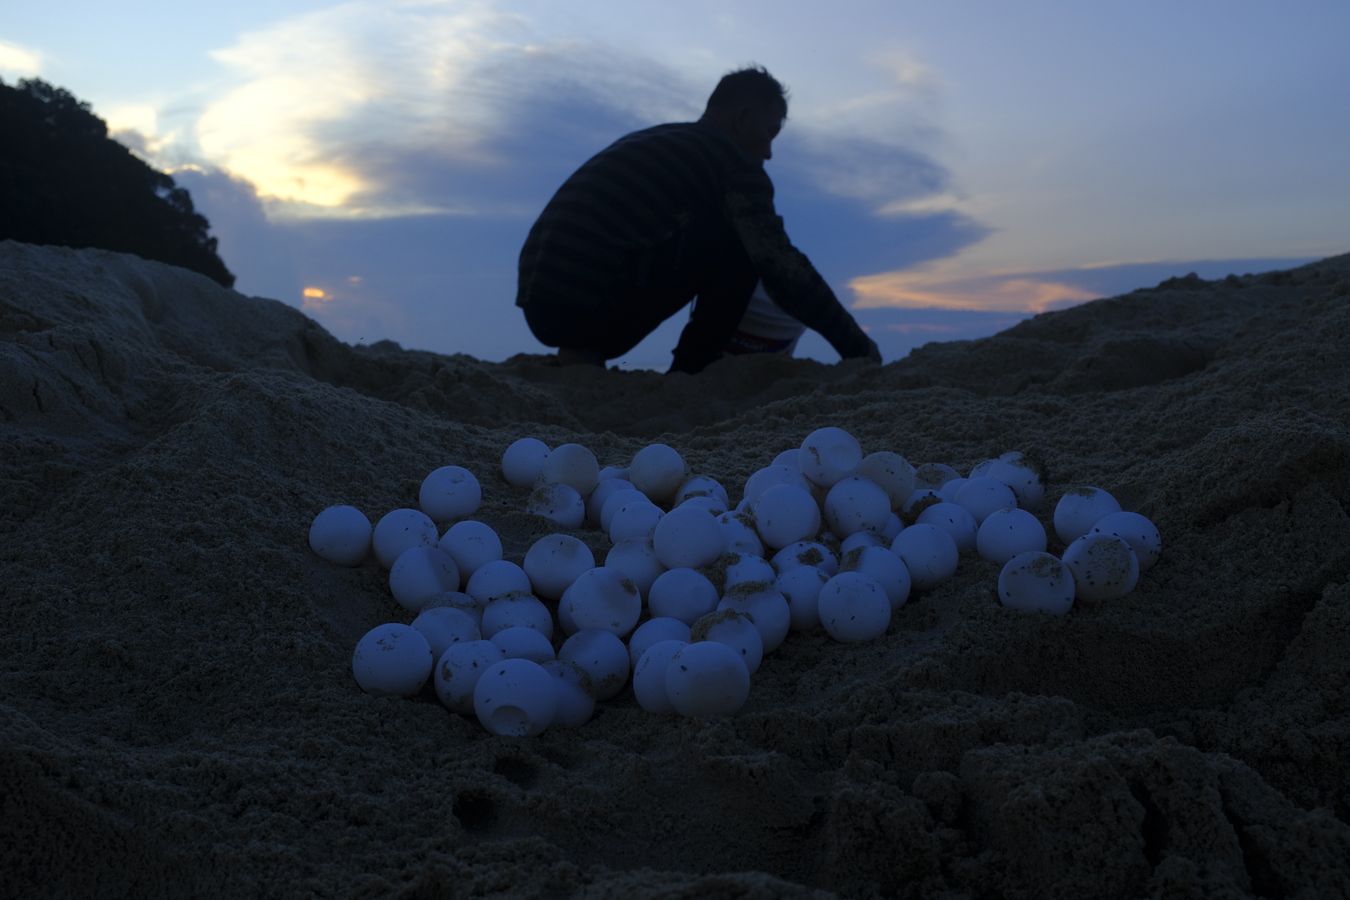 Green turtle eggs just taken from the nest, and a ranger collects eggs from another nest early in the morning.